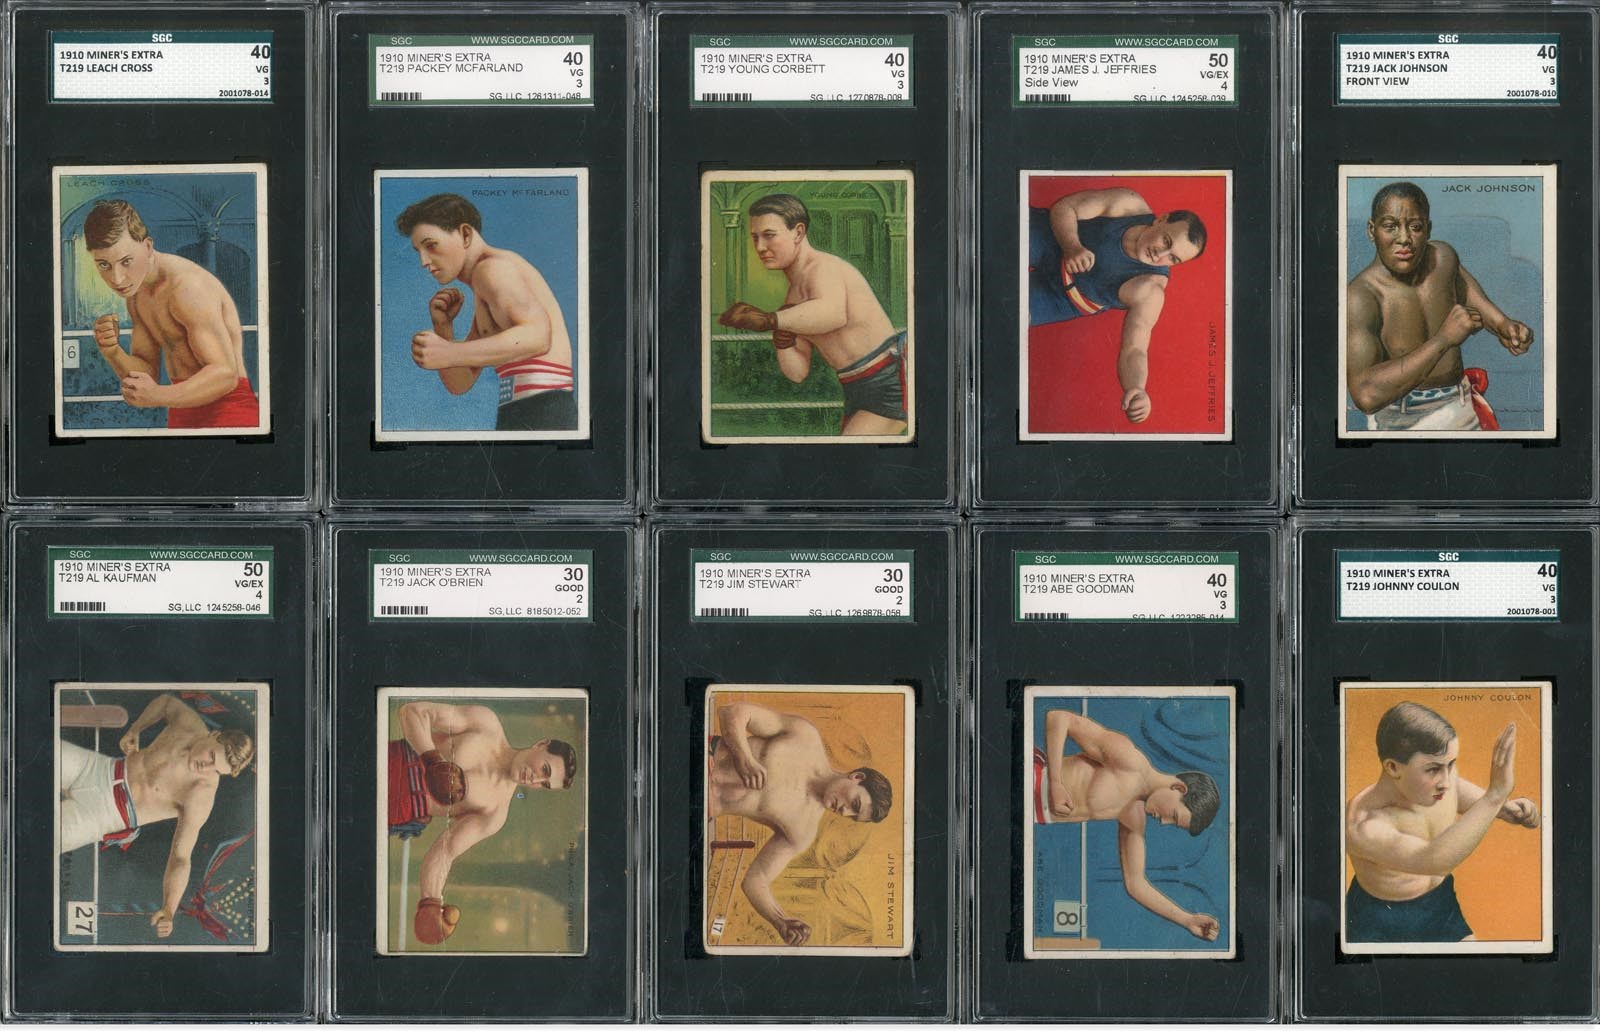 - Rare 1910 Miner's Extra T219 Boxing Card Complete Set - #1 on SGC Registry